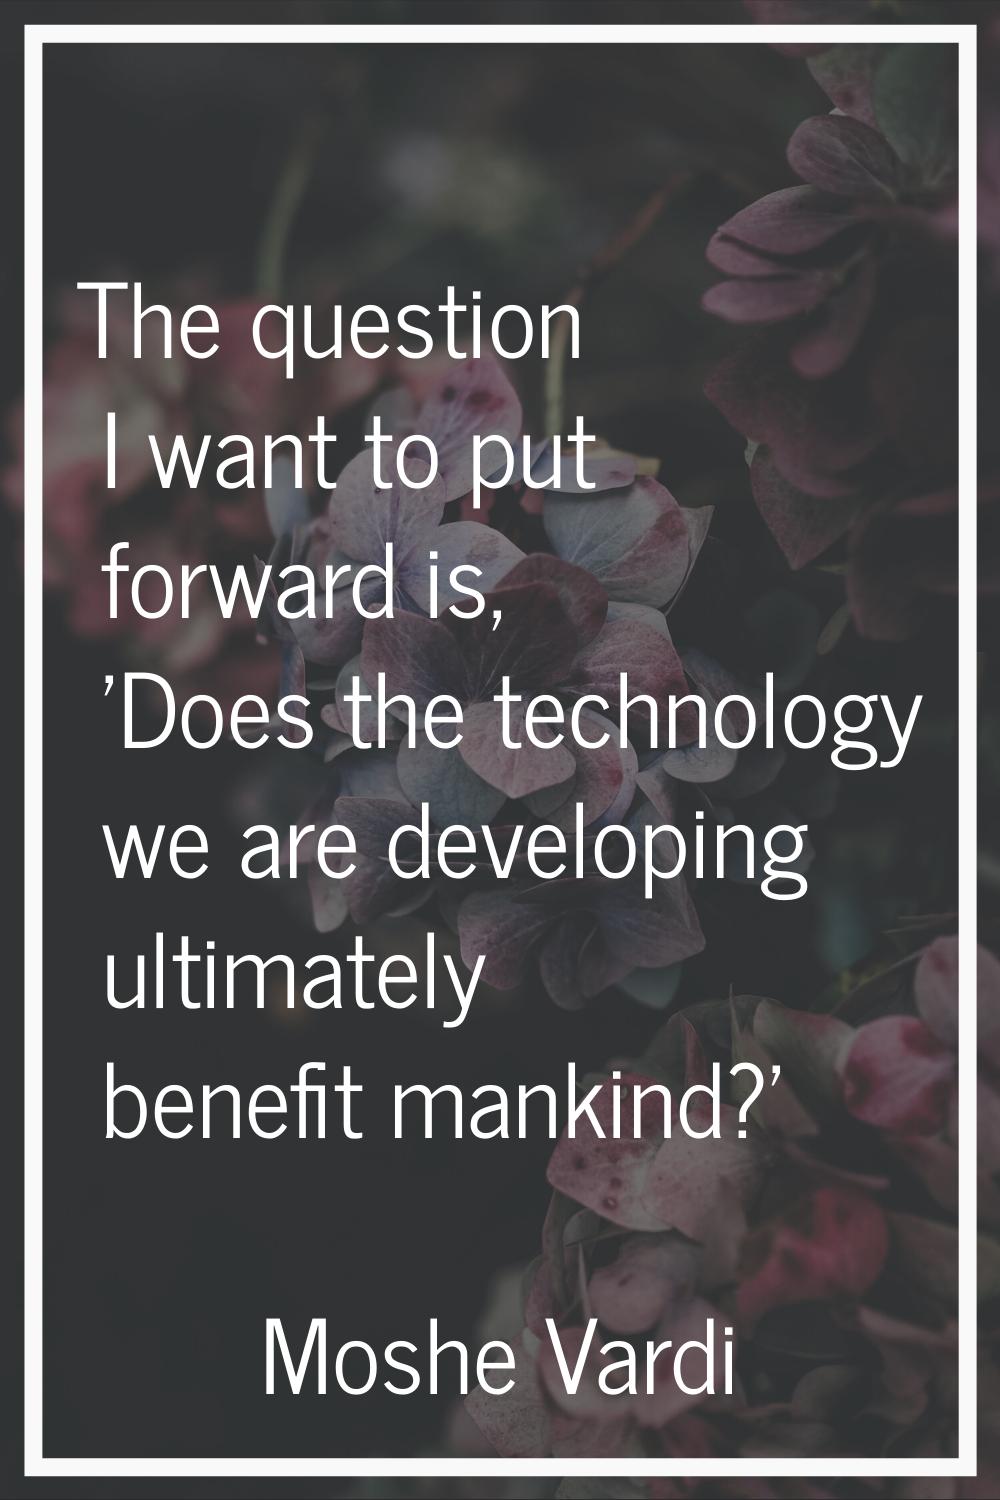 The question I want to put forward is, 'Does the technology we are developing ultimately benefit ma